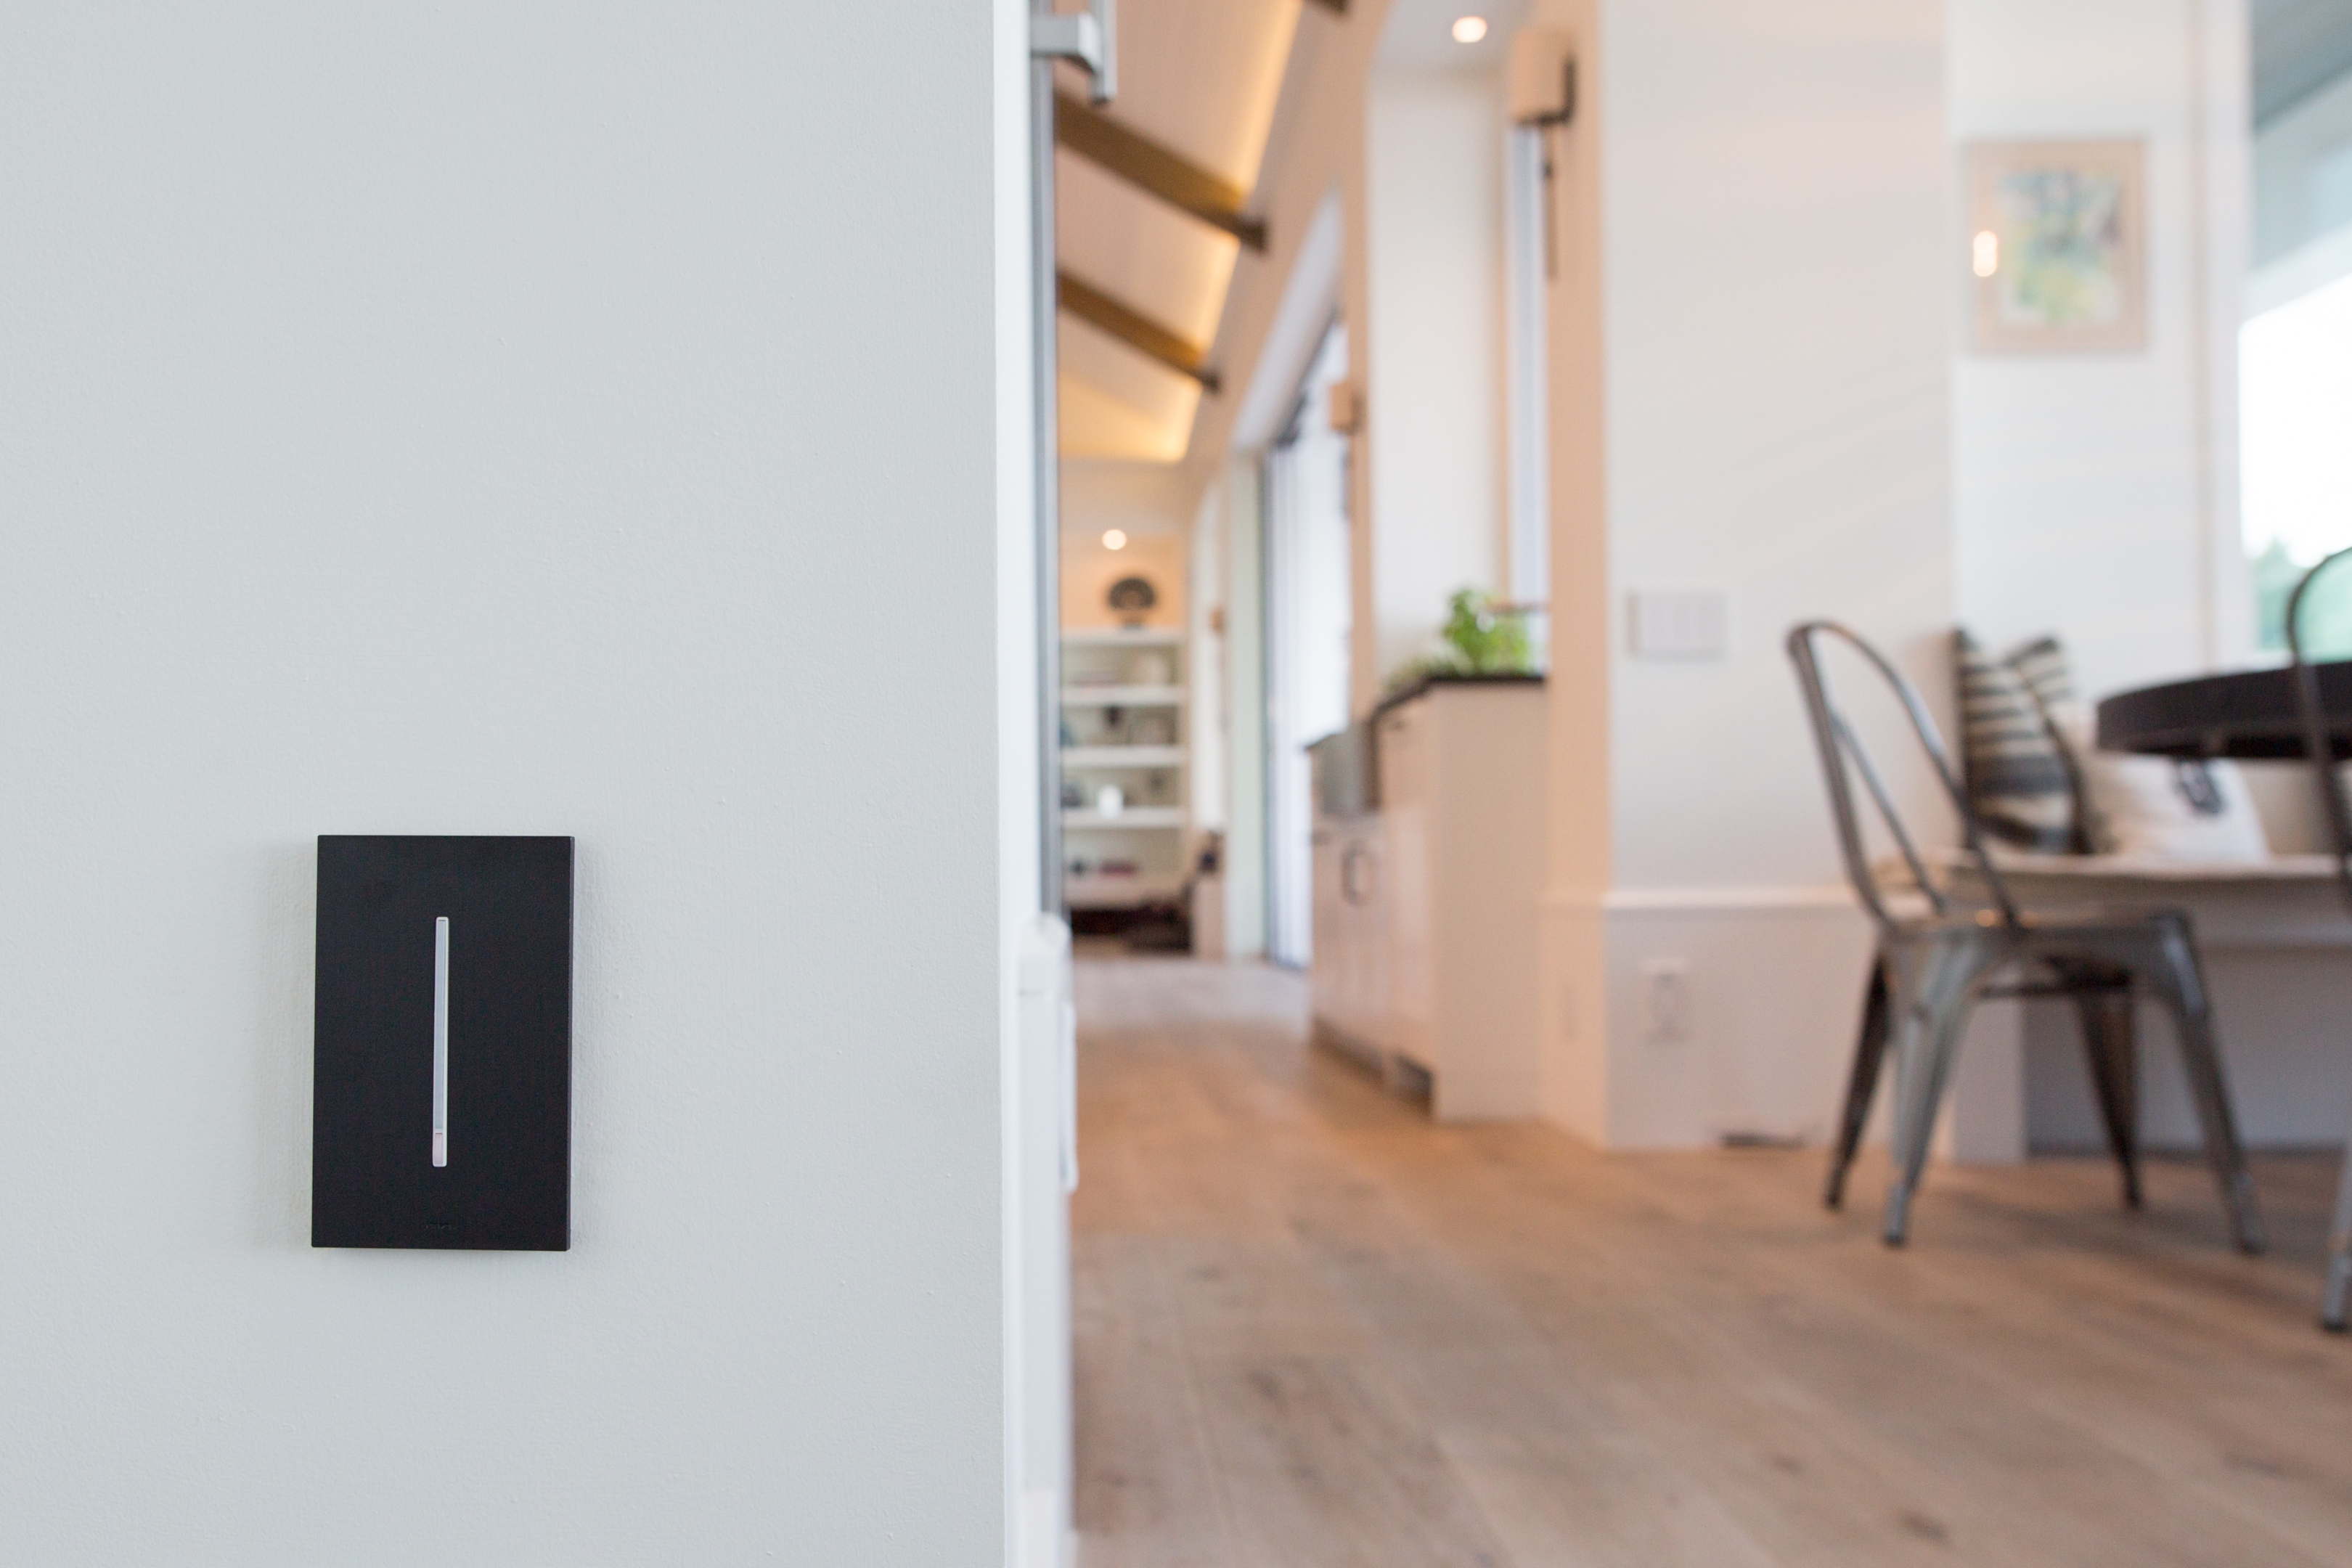 An image of an occupancy sensor installed in a residential space, highlighting the benefits of smart lighting in residential spaces by automatically turning off lights when the room is unoccupied.